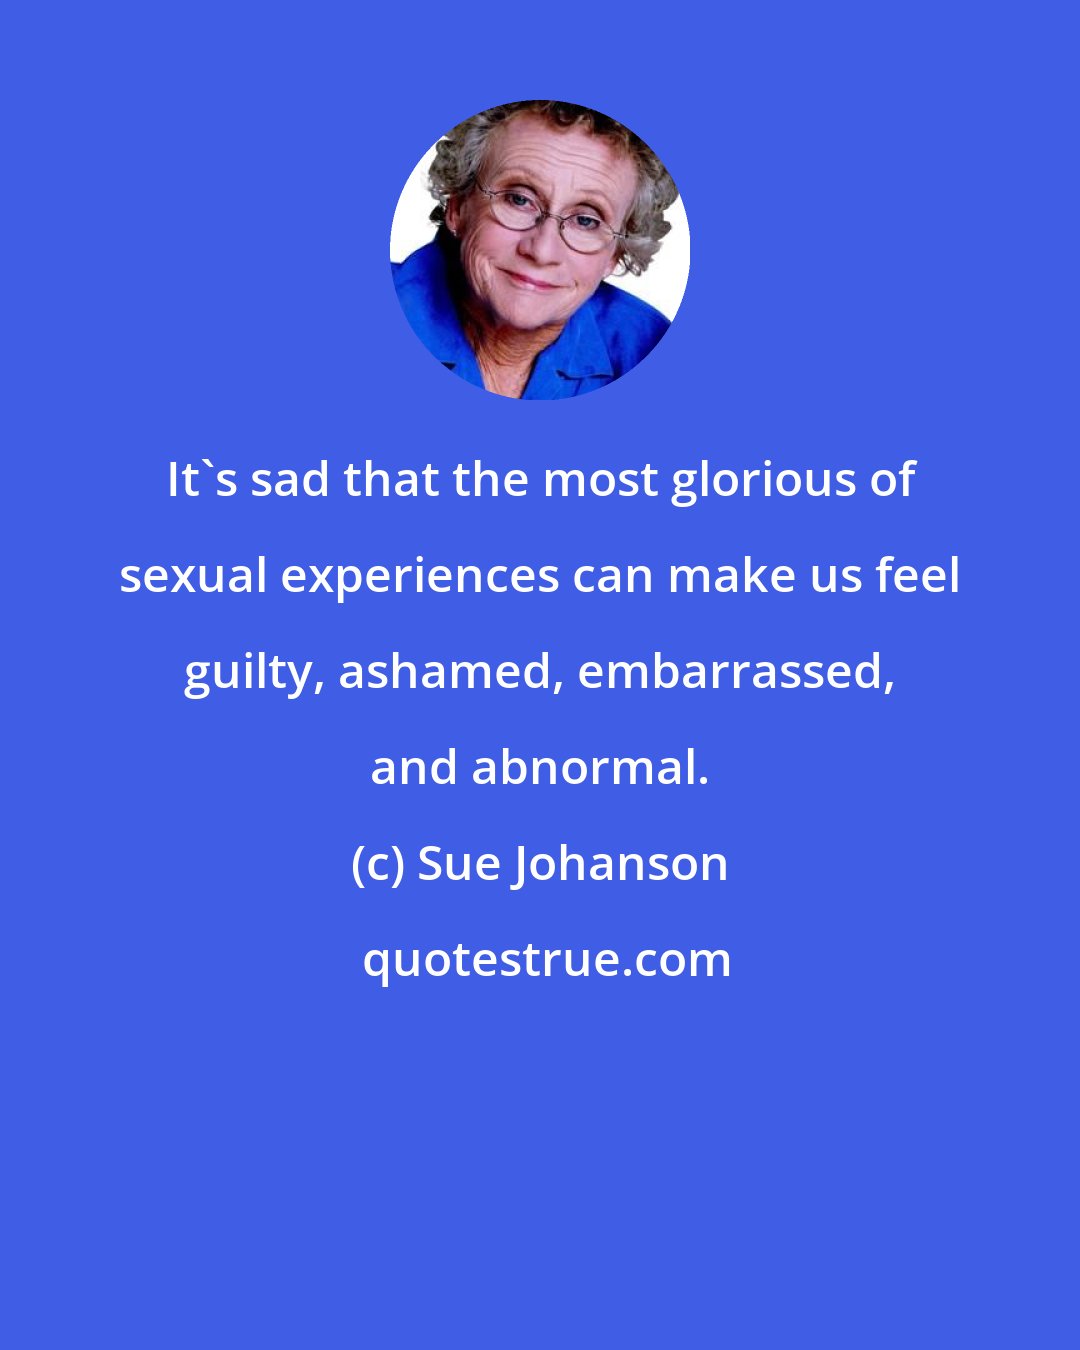 Sue Johanson: It's sad that the most glorious of sexual experiences can make us feel guilty, ashamed, embarrassed, and abnormal.